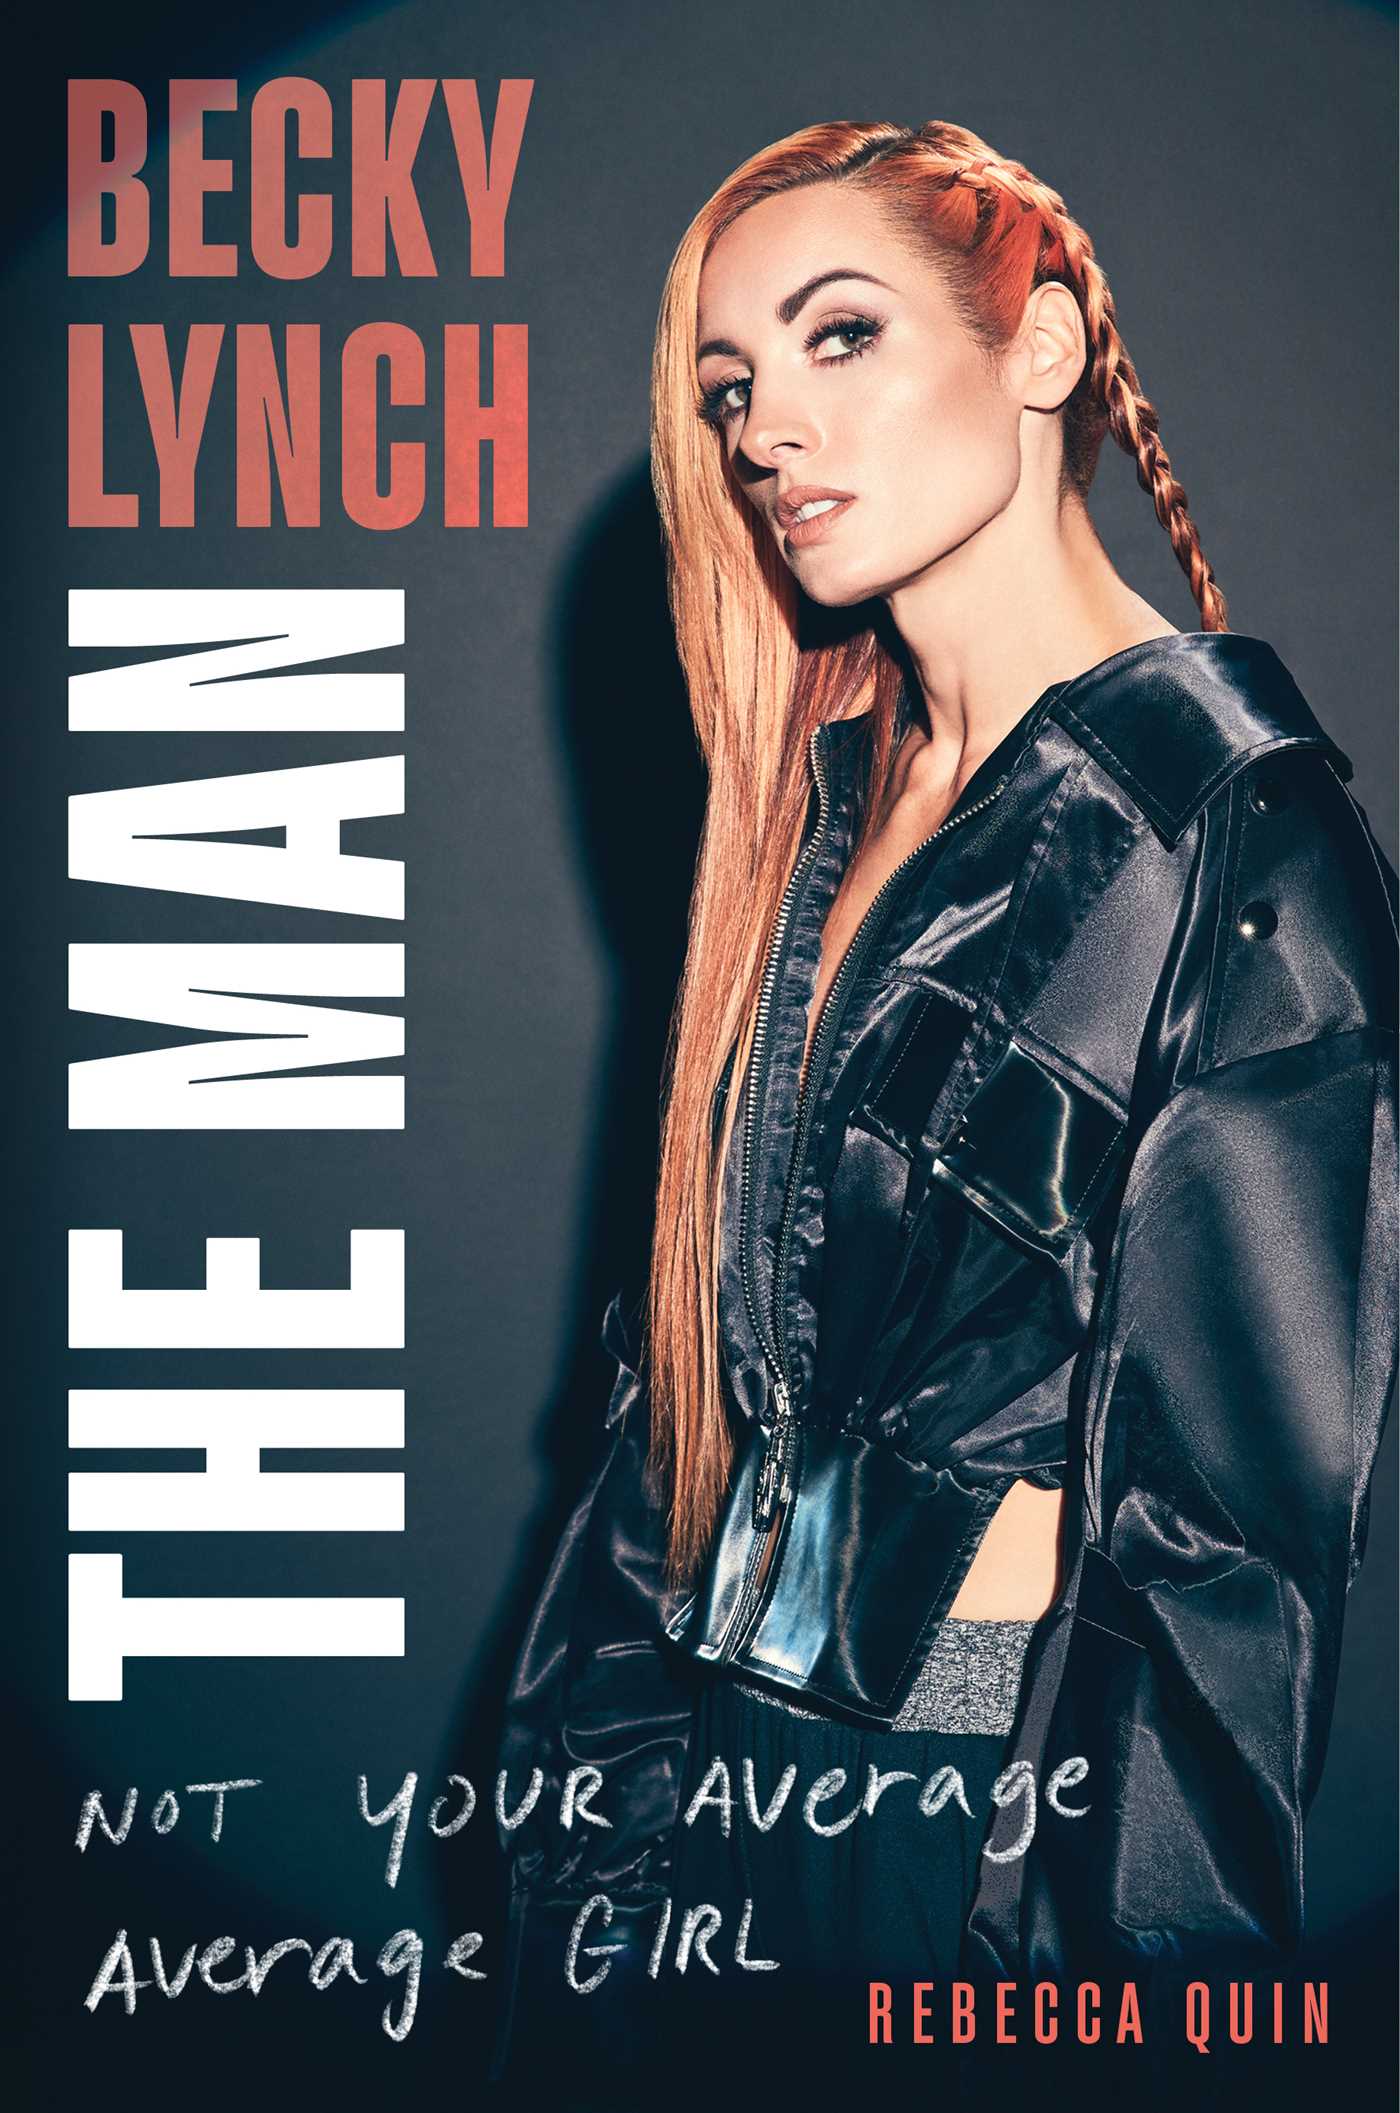 Image for "Becky Lynch: The Man"